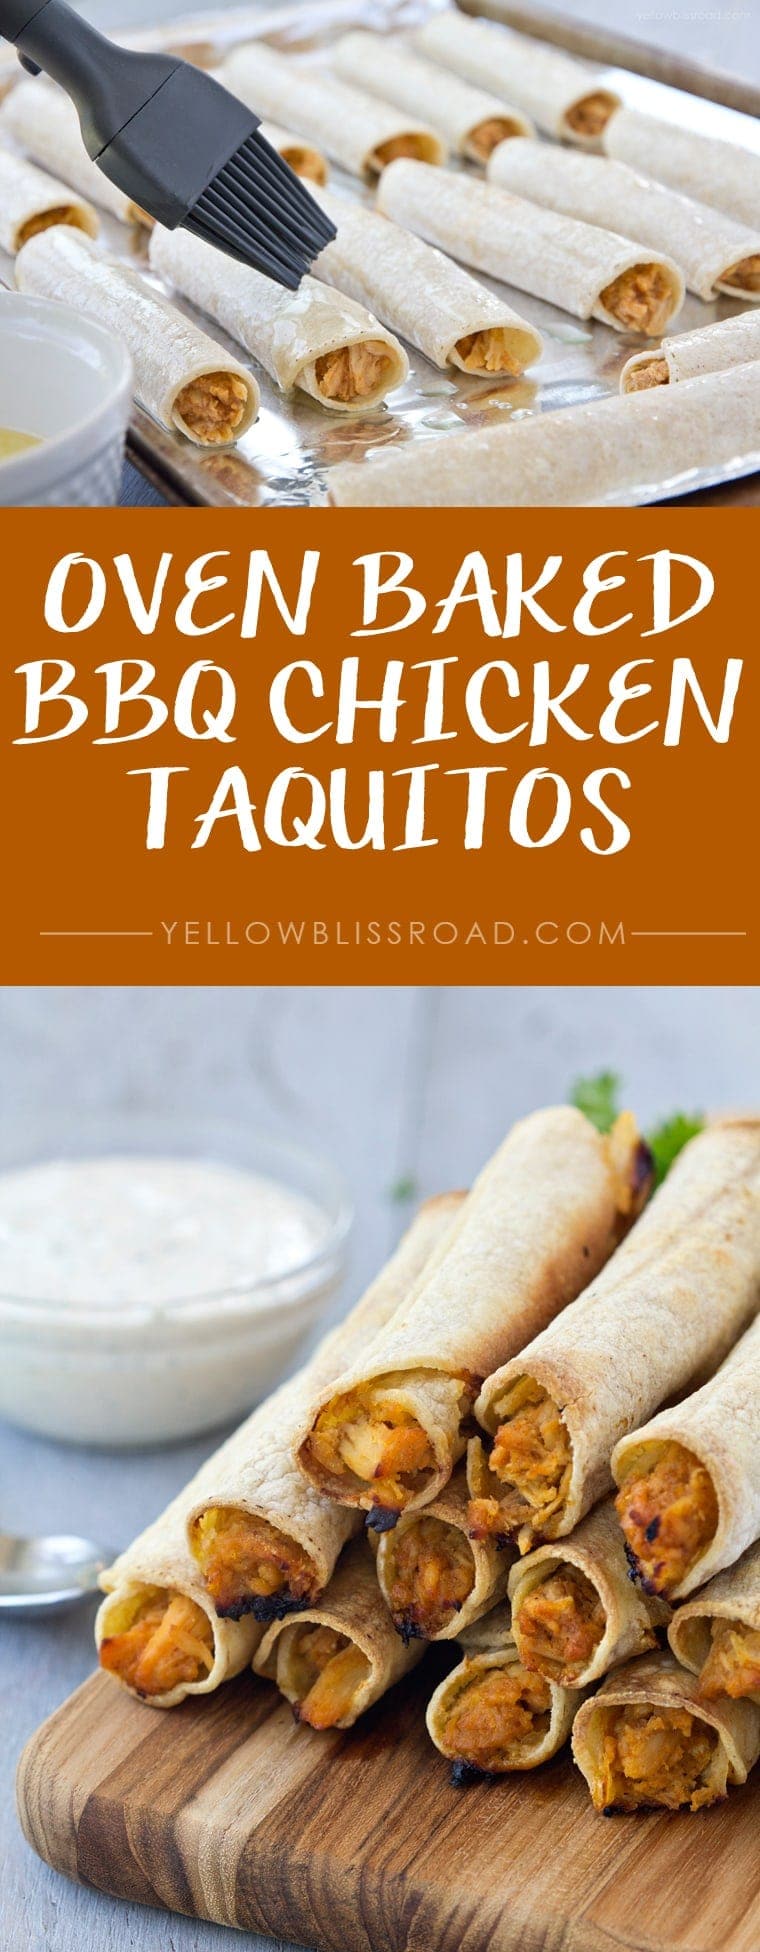 Oven Baked BBQ Chicken Taquitos with Homemade Ranch - Yellow Bliss Road